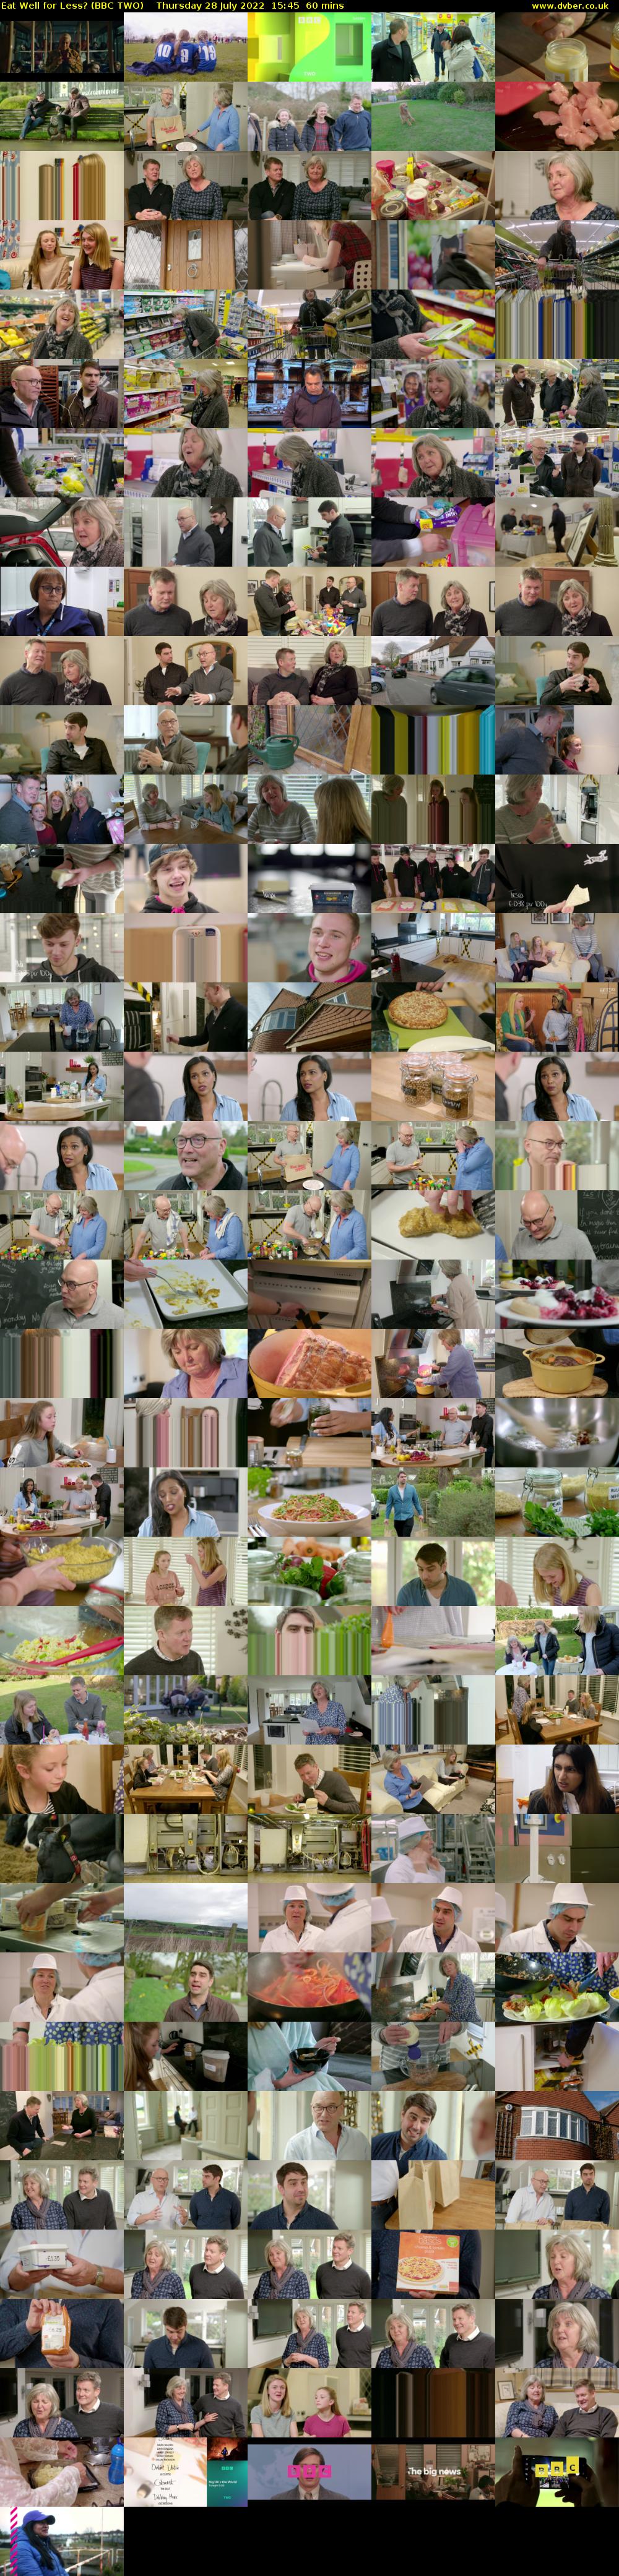 Eat Well for Less? (BBC TWO) Thursday 28 July 2022 15:45 - 16:45